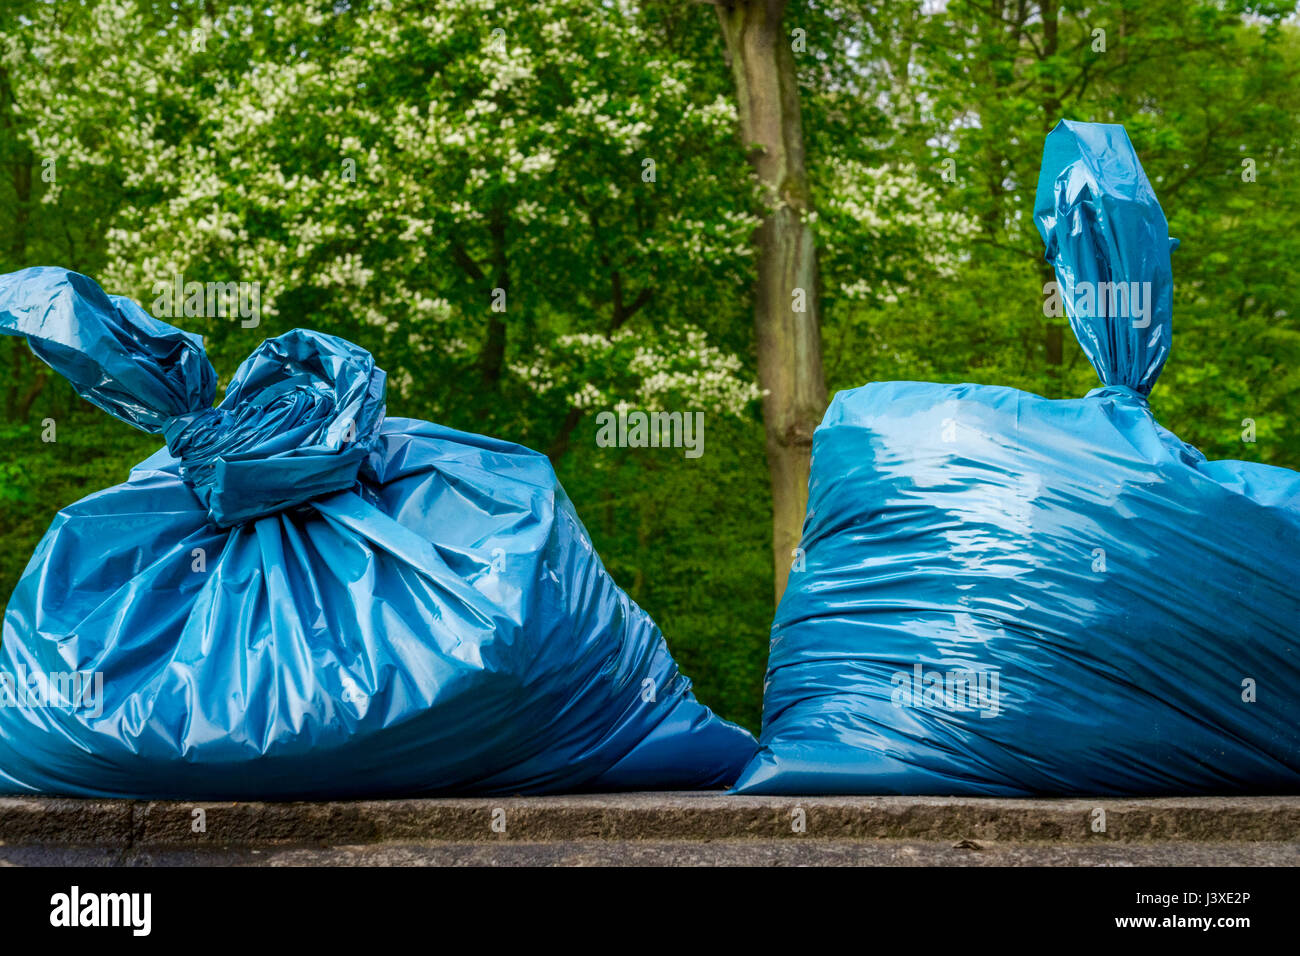 Two blue garbage bags outside in the city park (Stadtpark) against green background in Hamburg, Germany Stock Photo